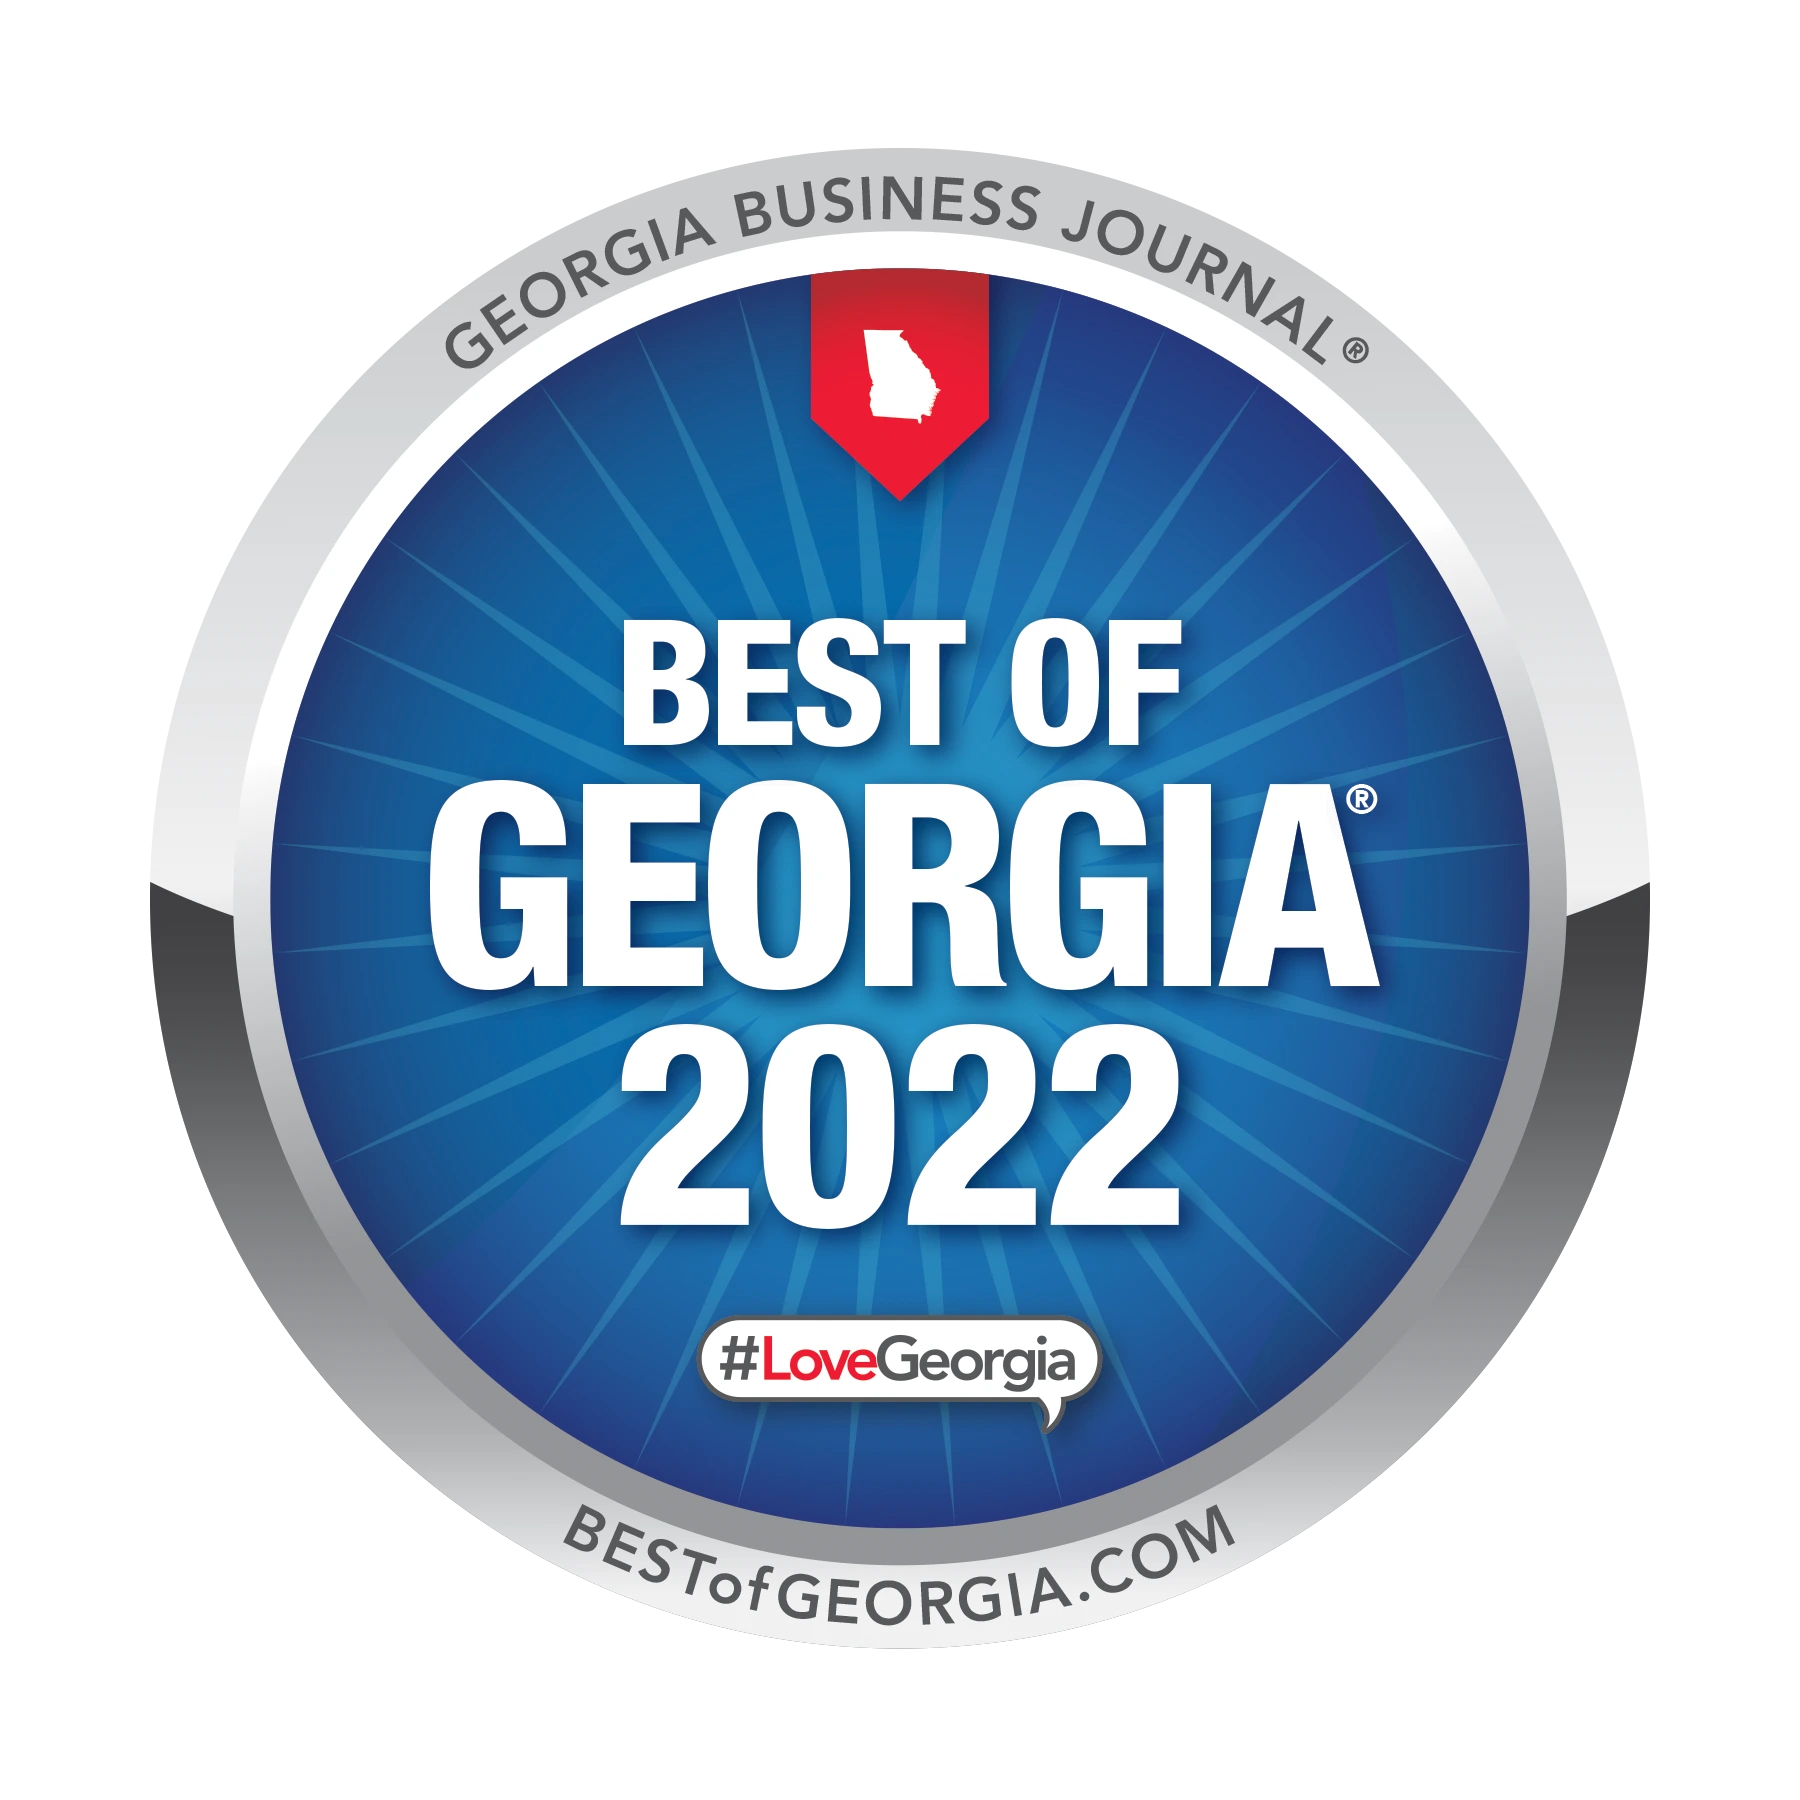 Best of Georgia law firm 2022